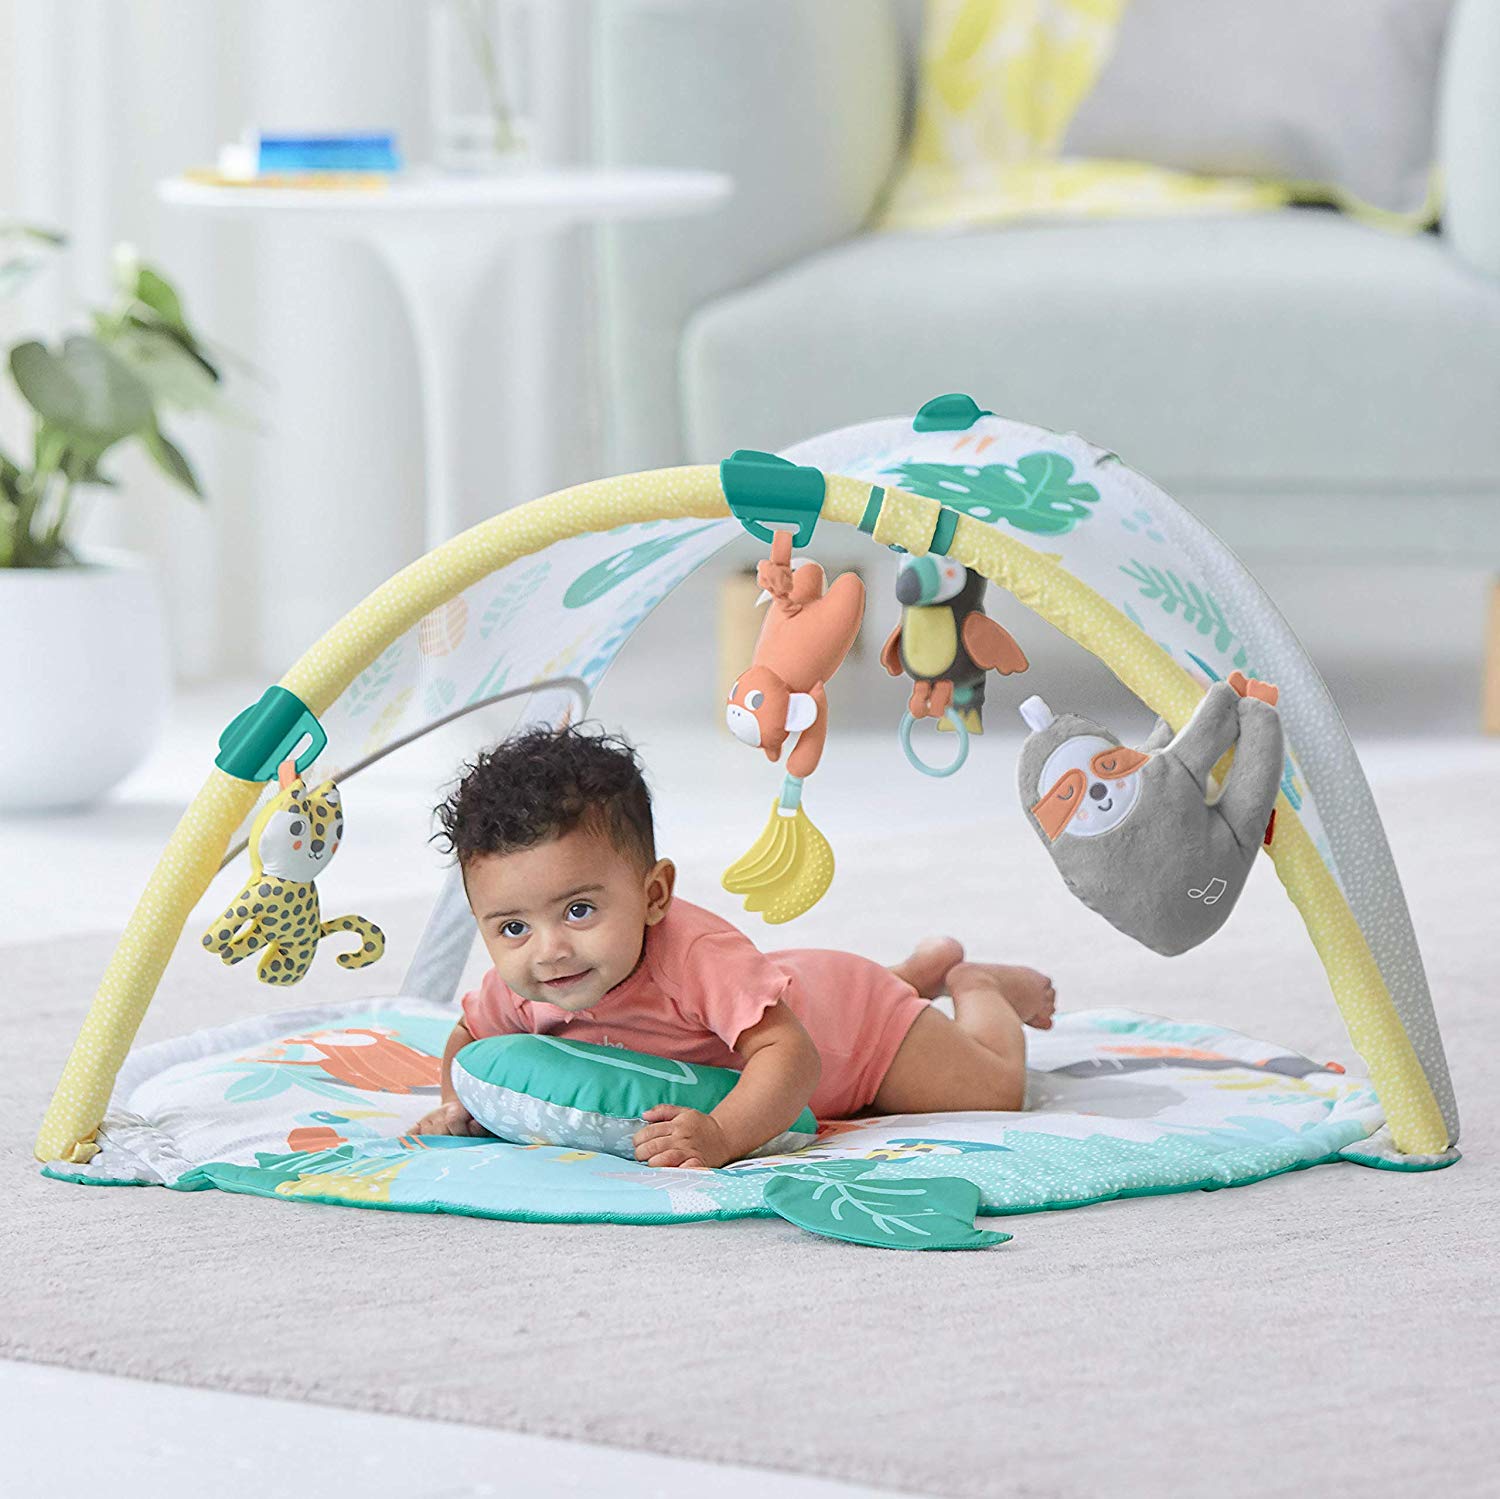 kip Hop Tropical Paradise Play Gym with Sloth Soother